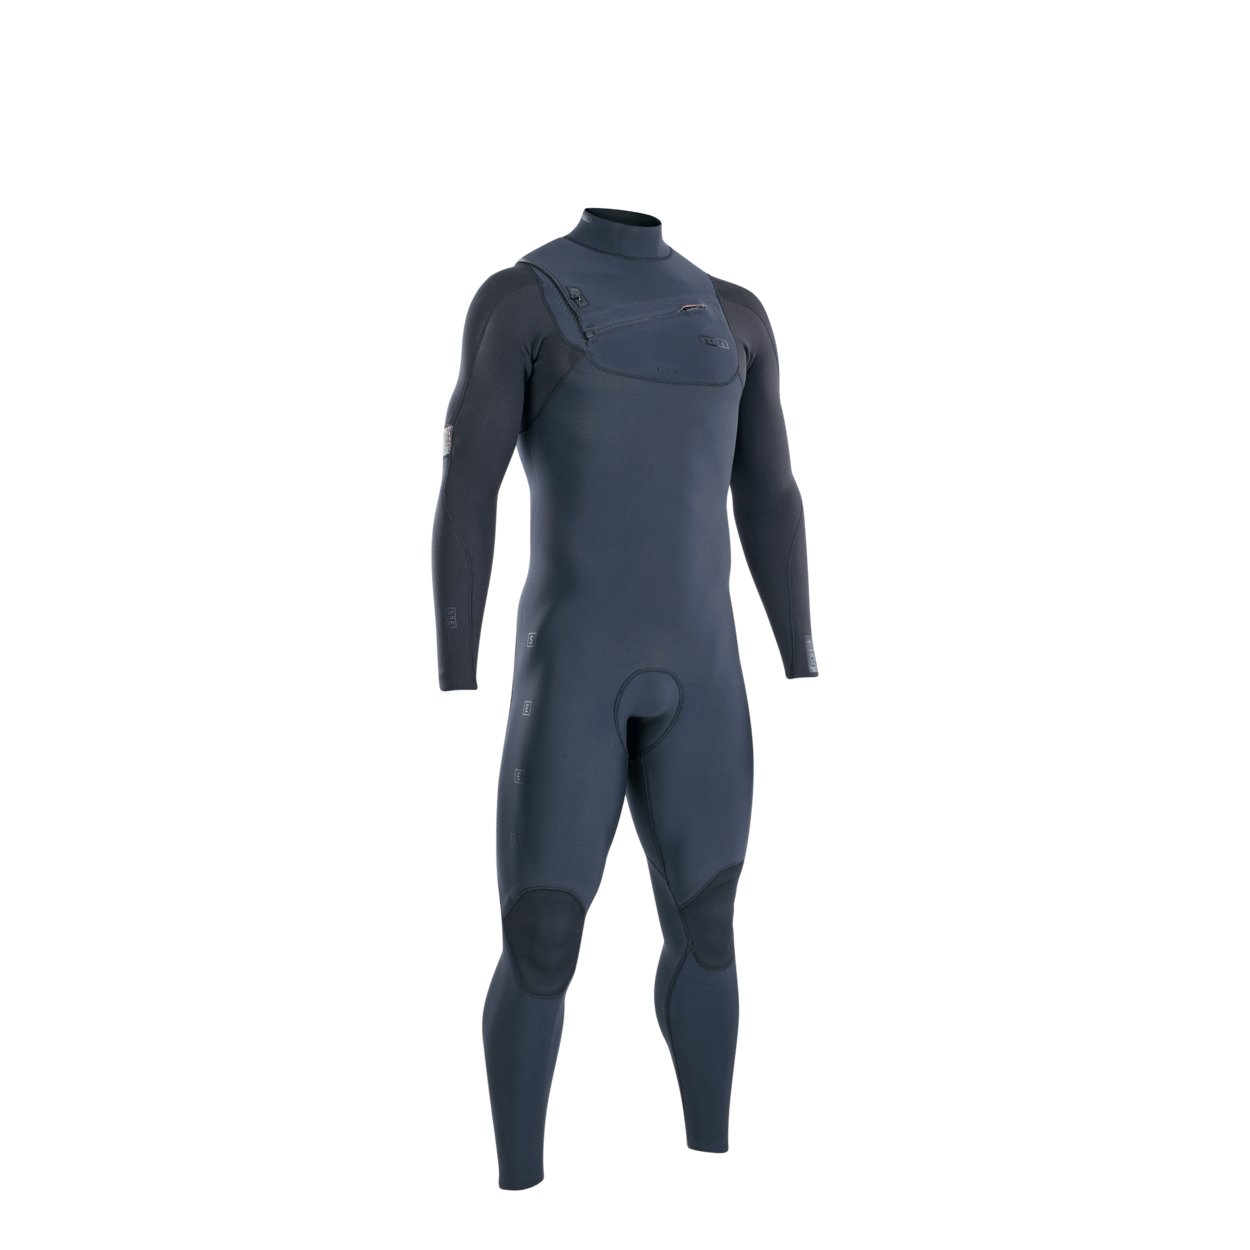 ION Seek Amp 4/3 Front Zip 2022 - Worthing Watersports - 9010583056074 - Wetsuits - ION Water